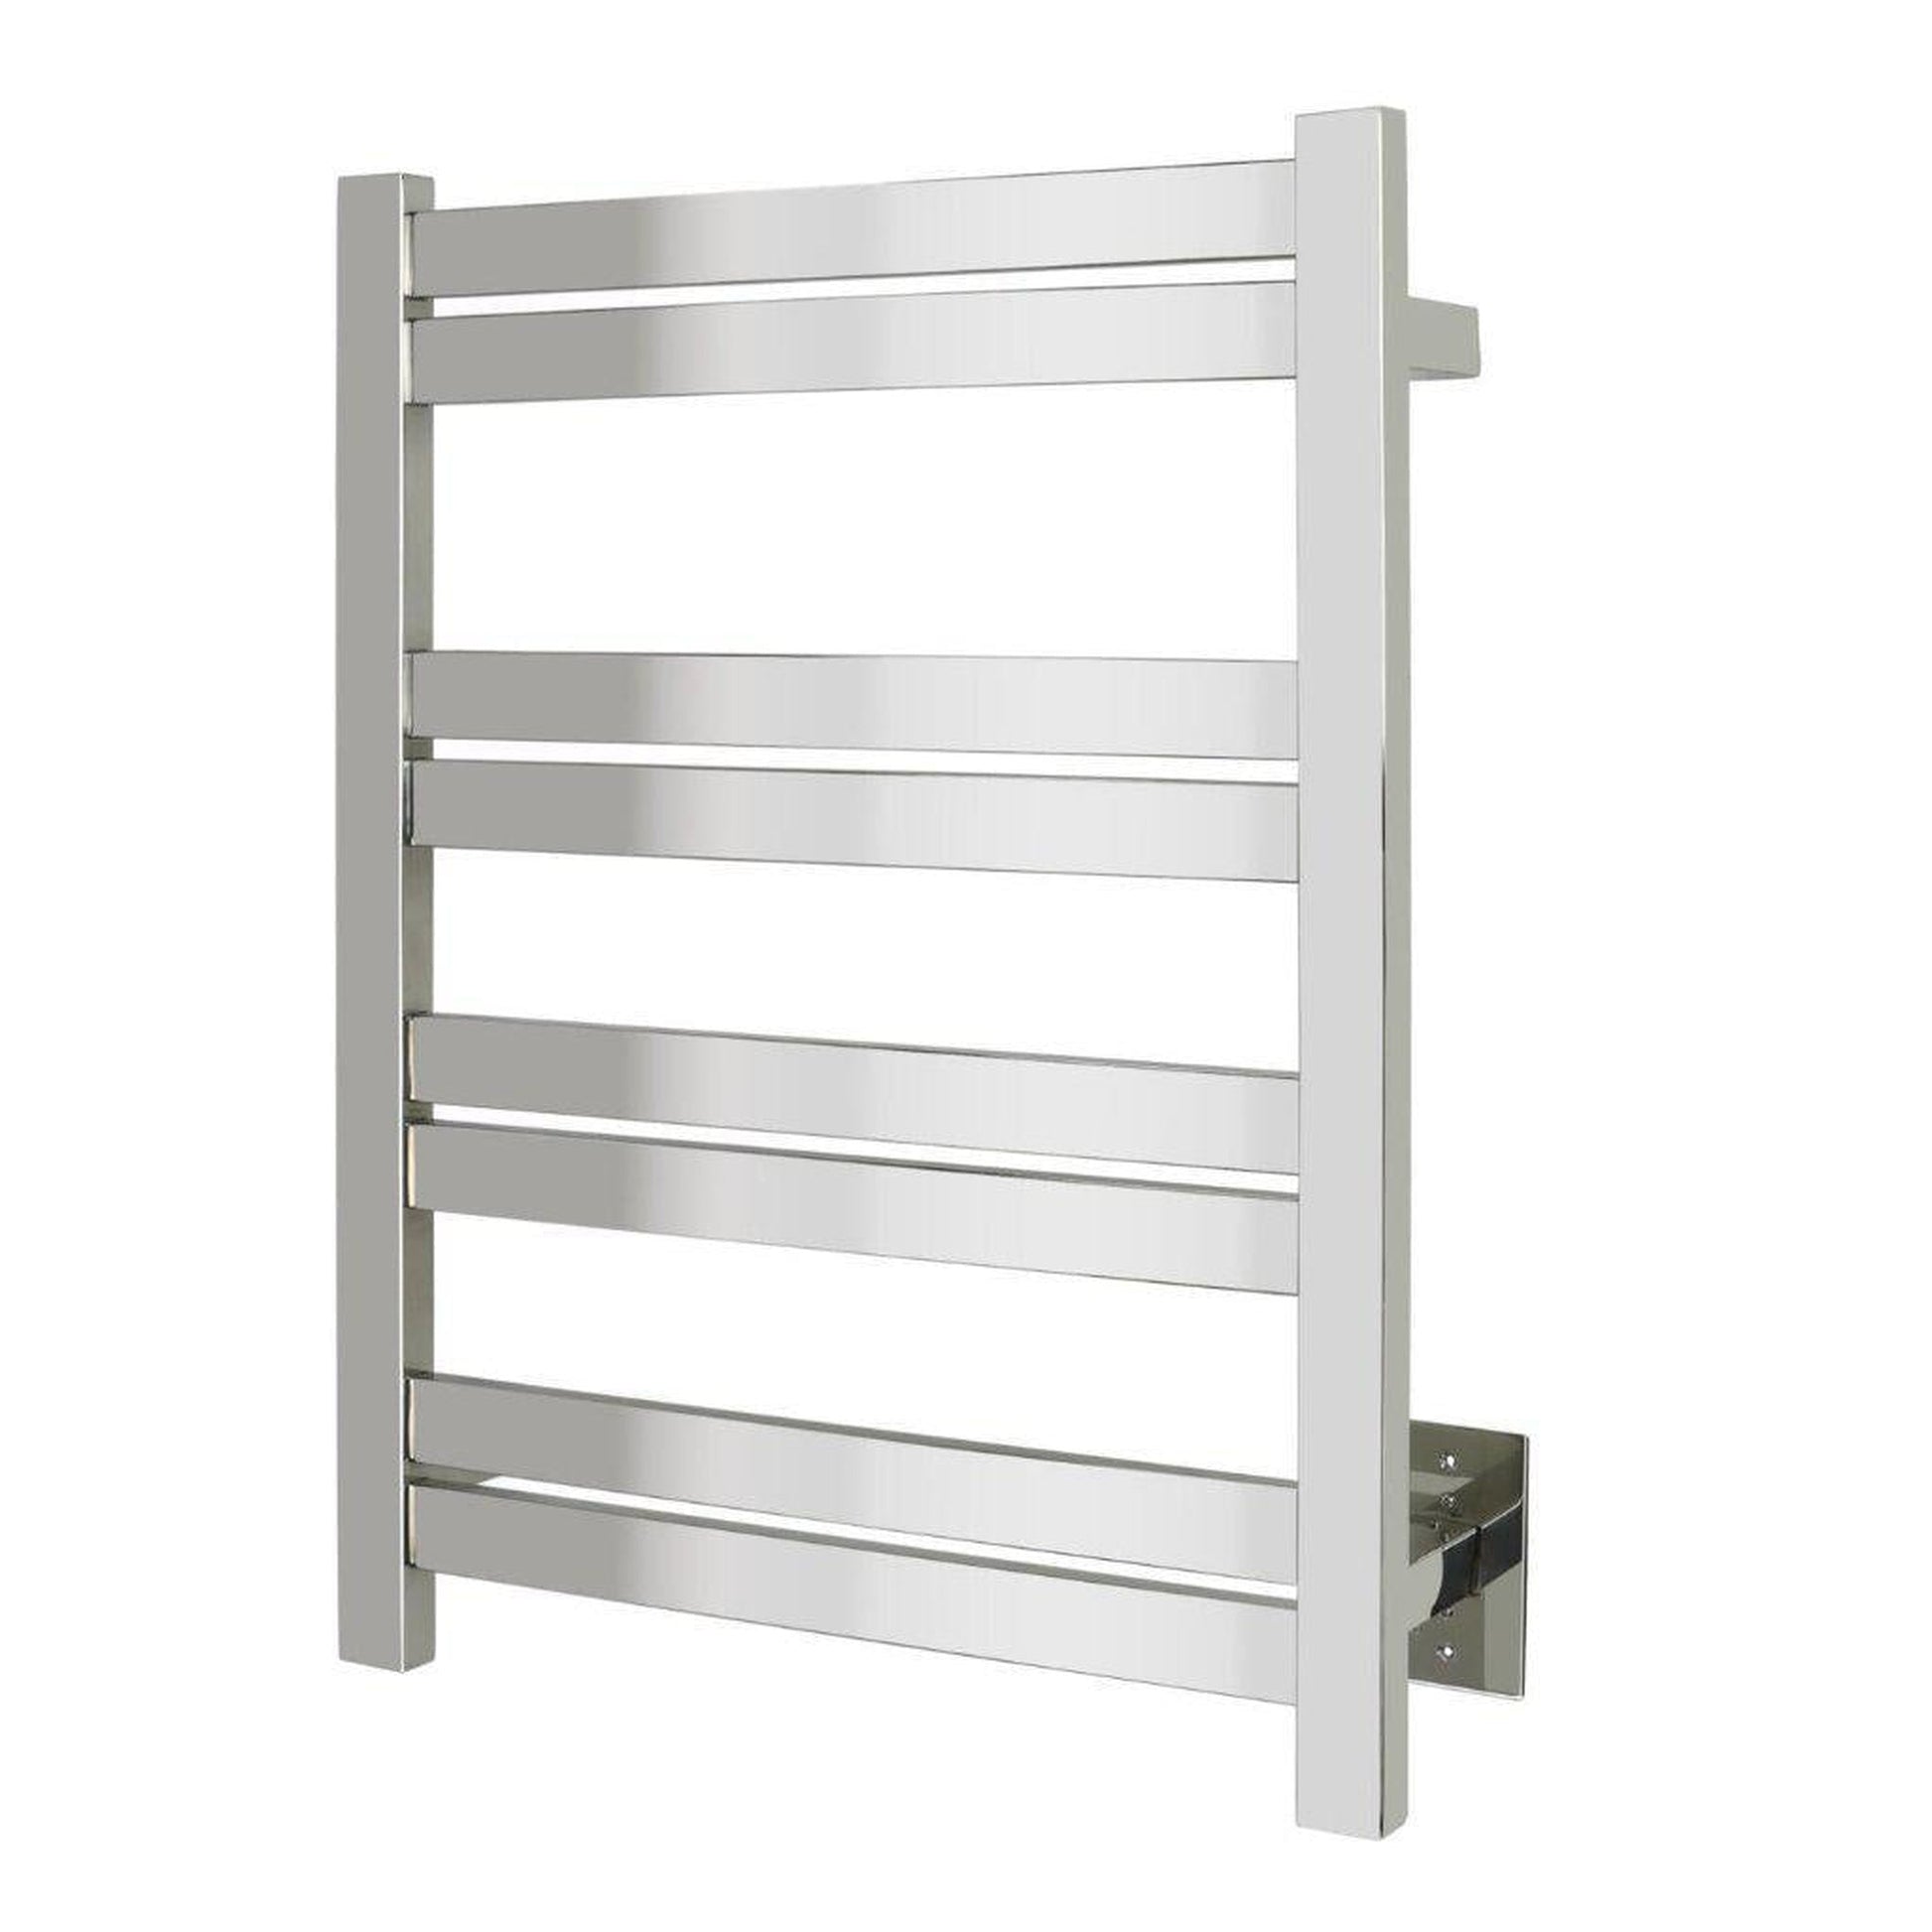 WarmlyYours Maple 8 20" x 28" Polished Stainless Steel Wall-Mounted 8-Bar Hardwired Towel Warmer